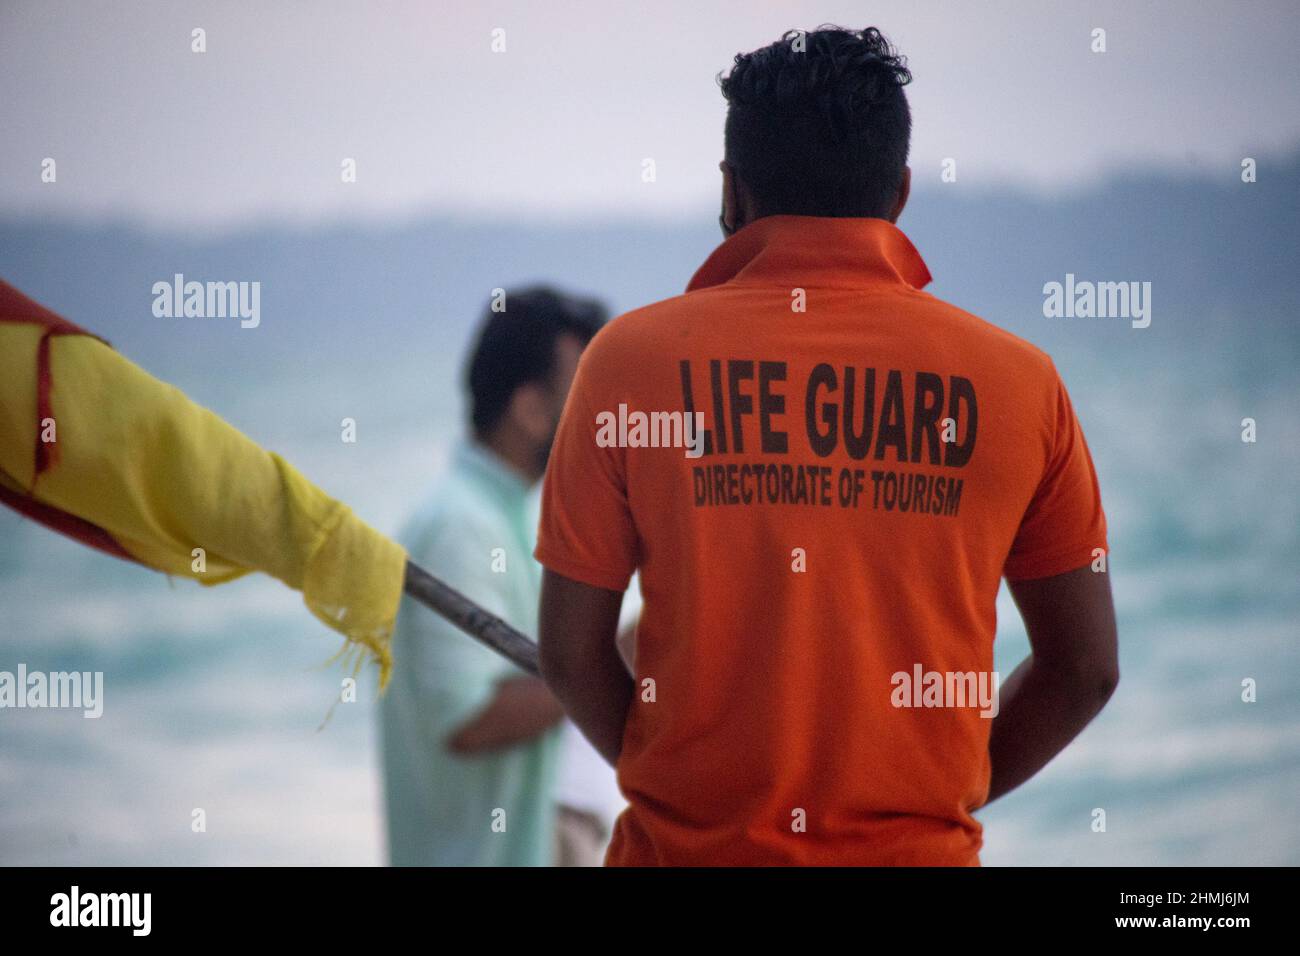 lifeguard in orange shirt carrying flag along the beach with tourists in background at havelock swaraj dweep andaman nicobar islands india Stock Photo